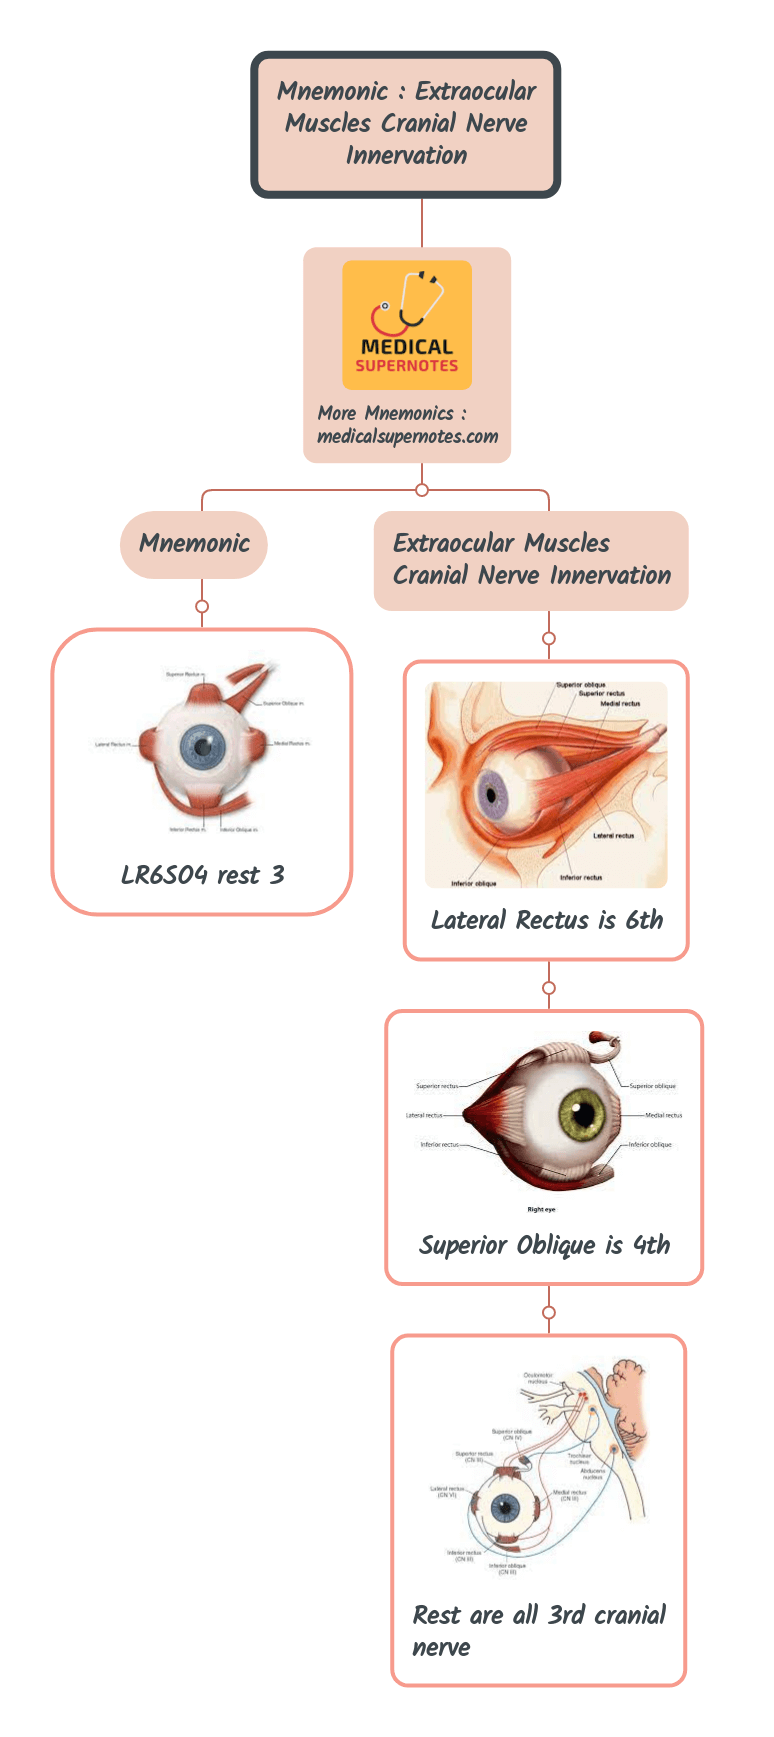 Mnemonic _ Extraocular Muscles Cranial Nerve Innervation